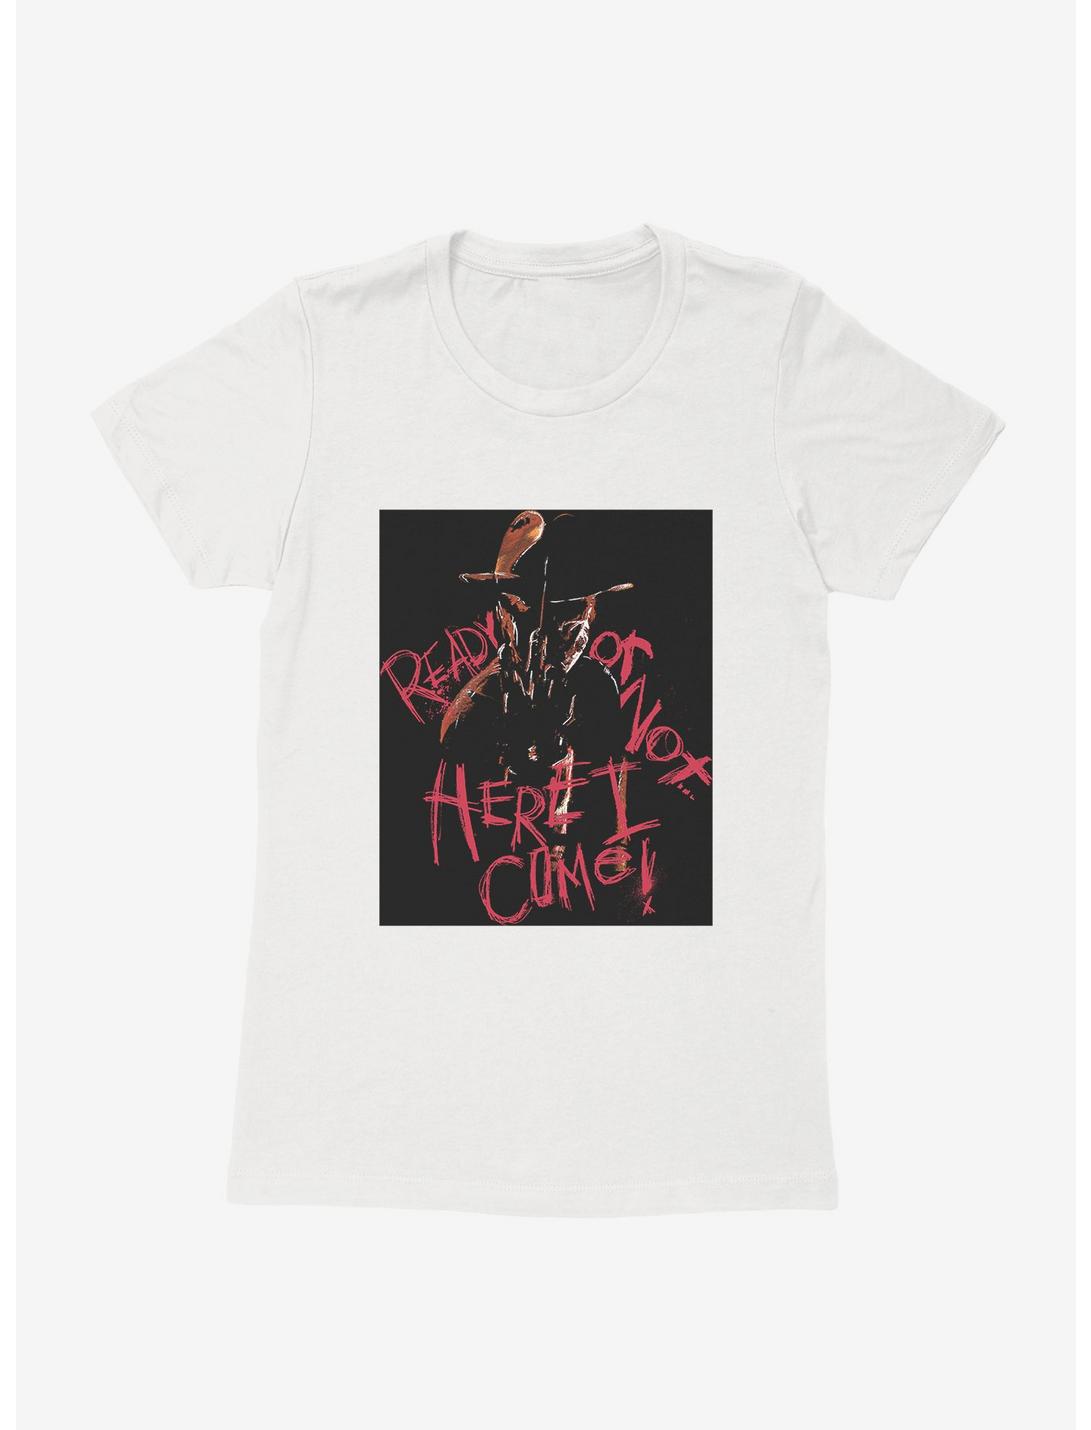 A Nightmare On Elm Street Ready Or Not Womens T-Shirt, WHITE, hi-res